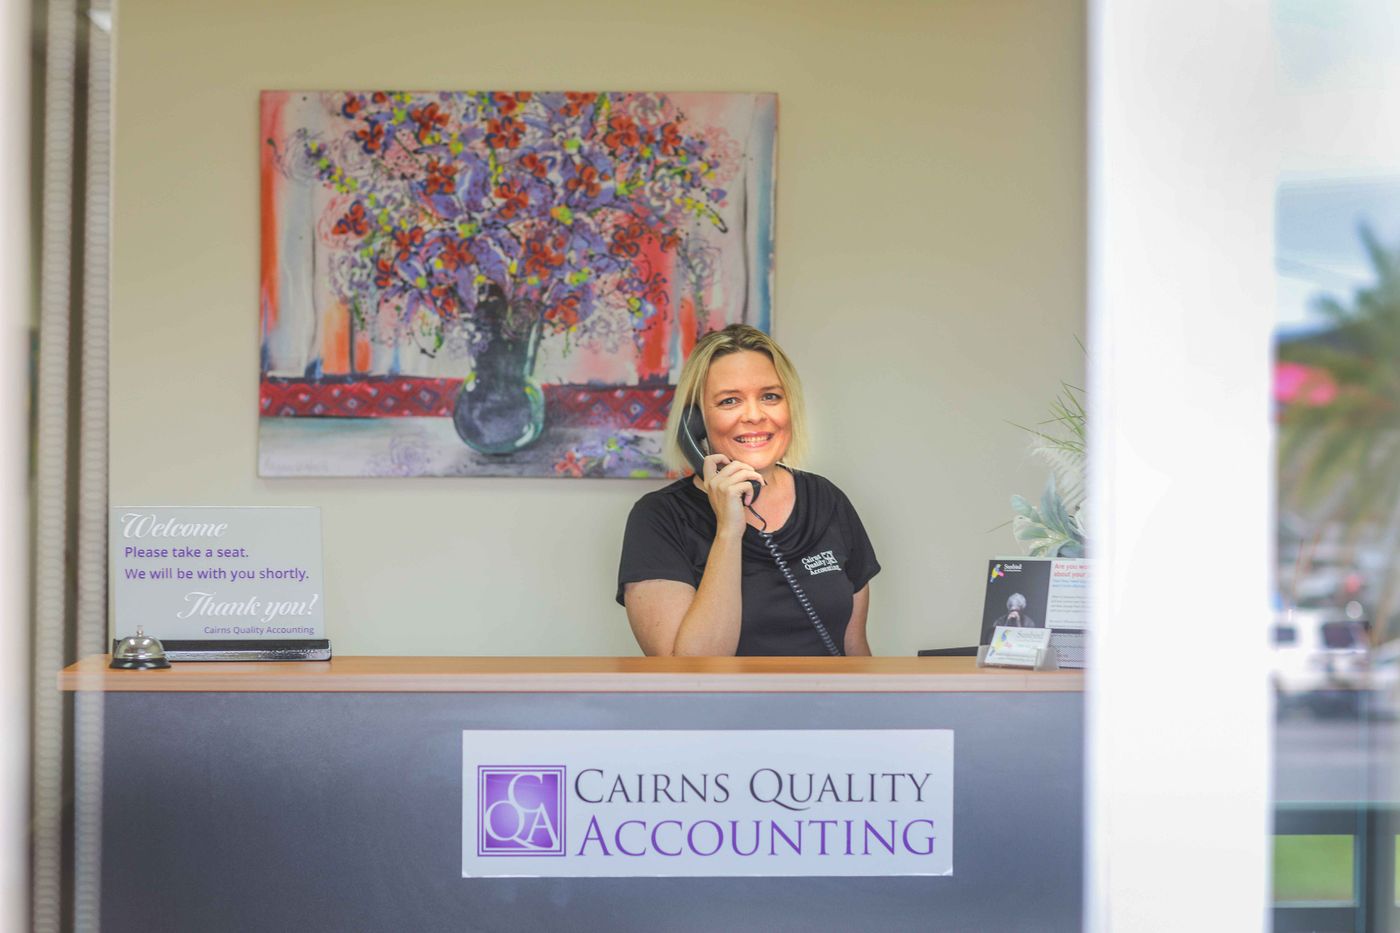 Cairns Quality Accounting image